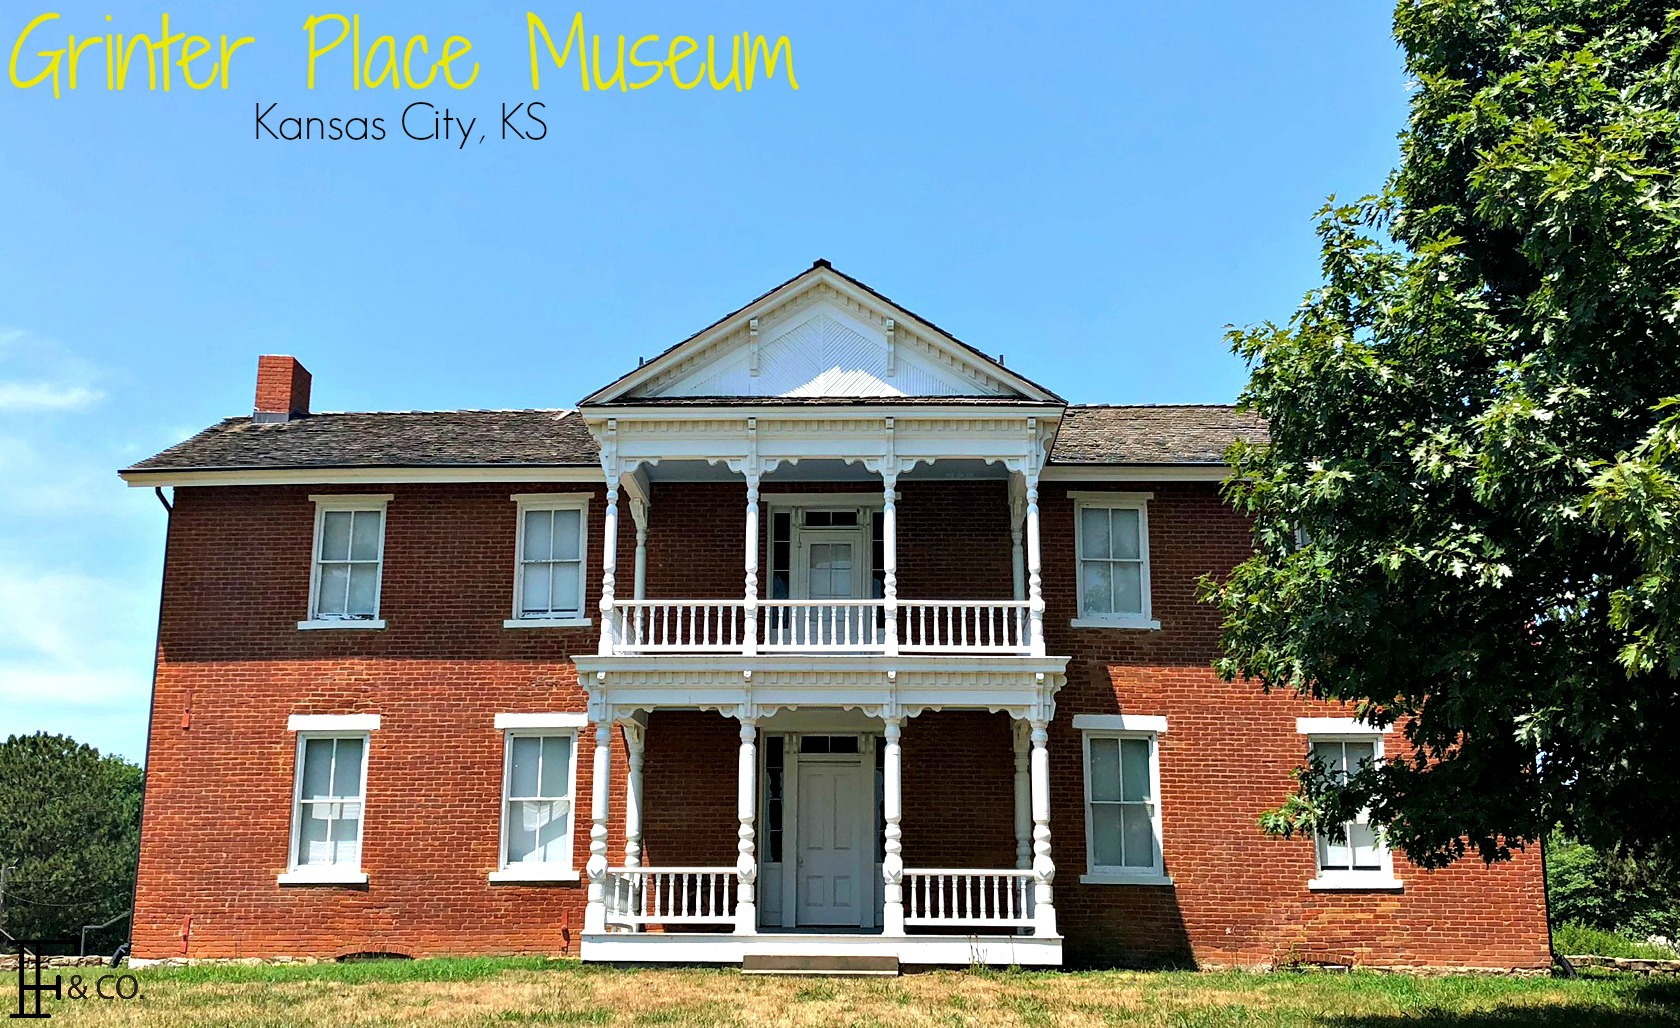 History & Agriculture in Kansas City, KS